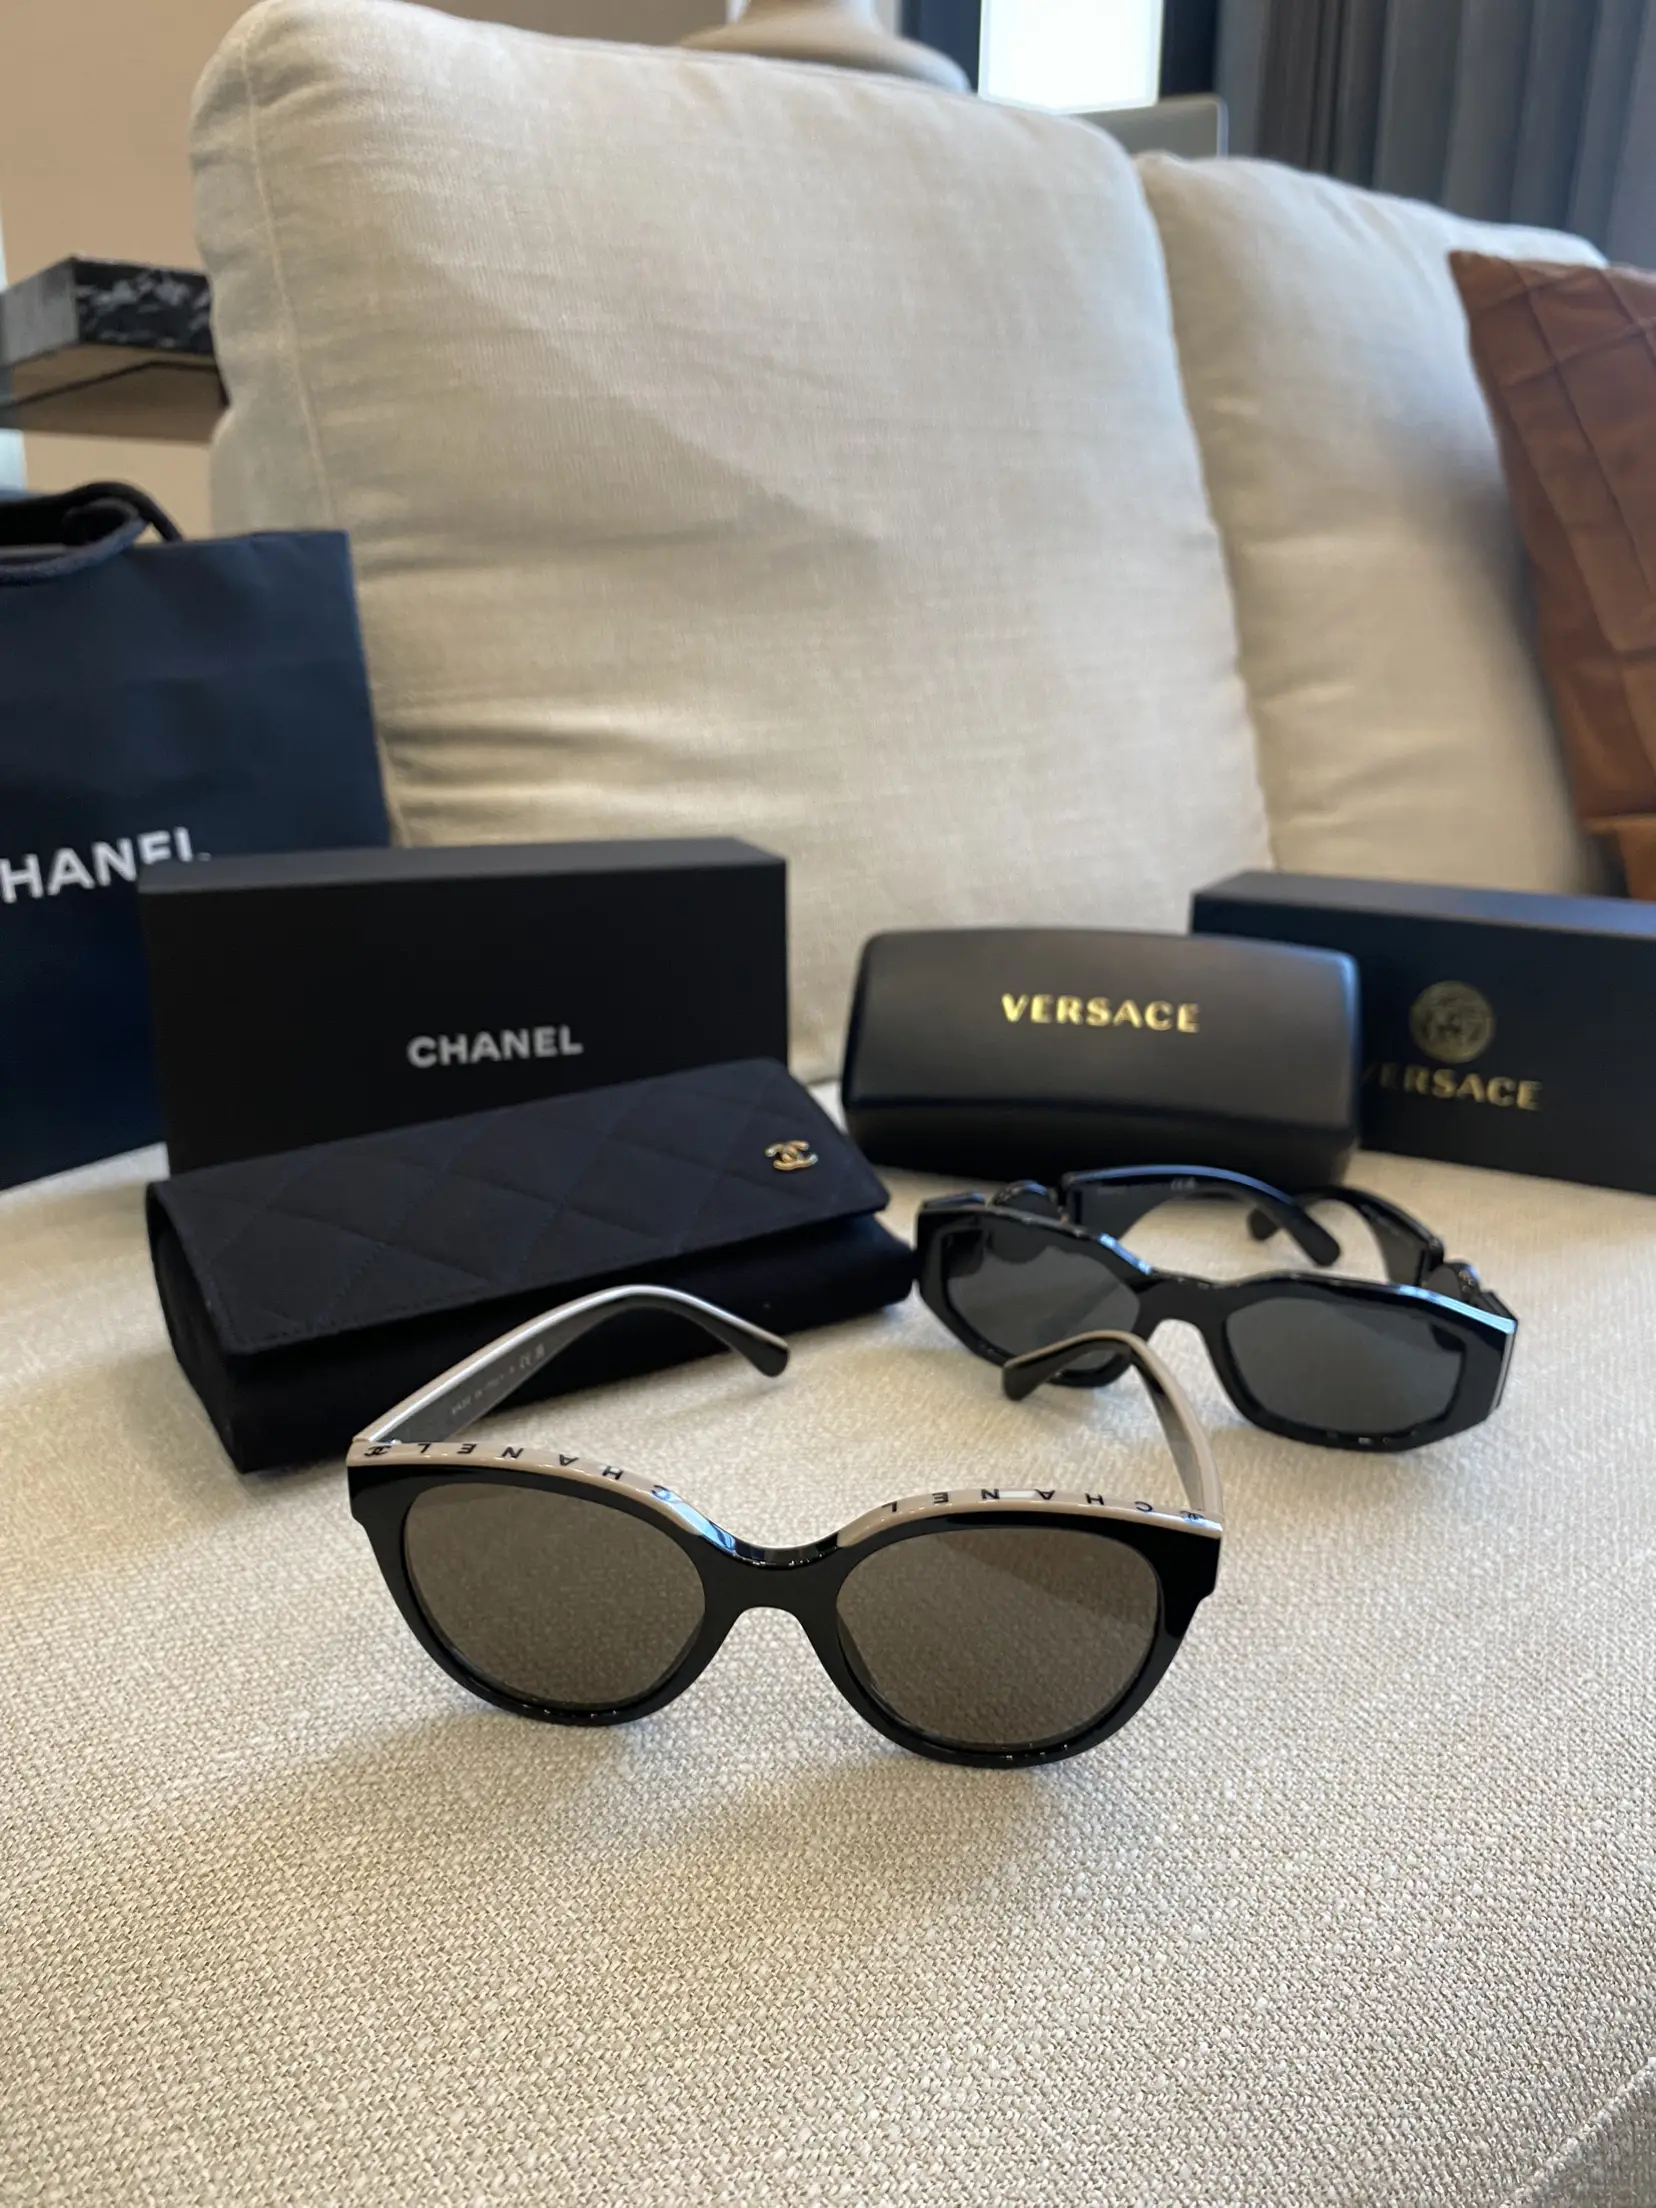 Chanel 5414 Butterfly Sunglasses Black - $400 (15% Off Retail) - From Emma